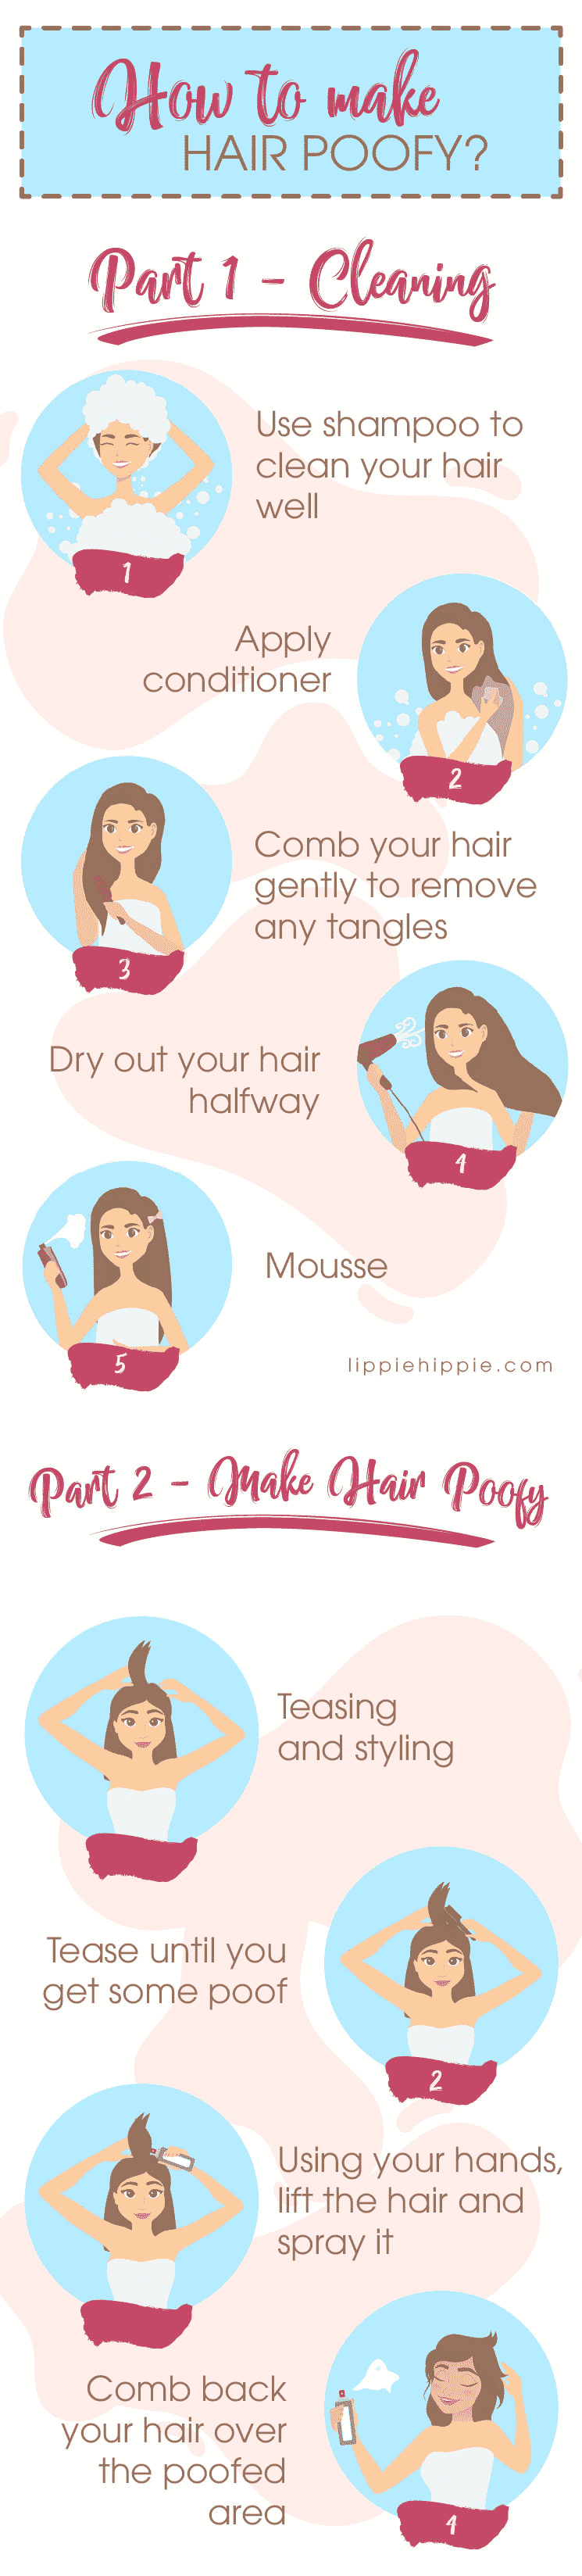 Infography - How to make hair poofy